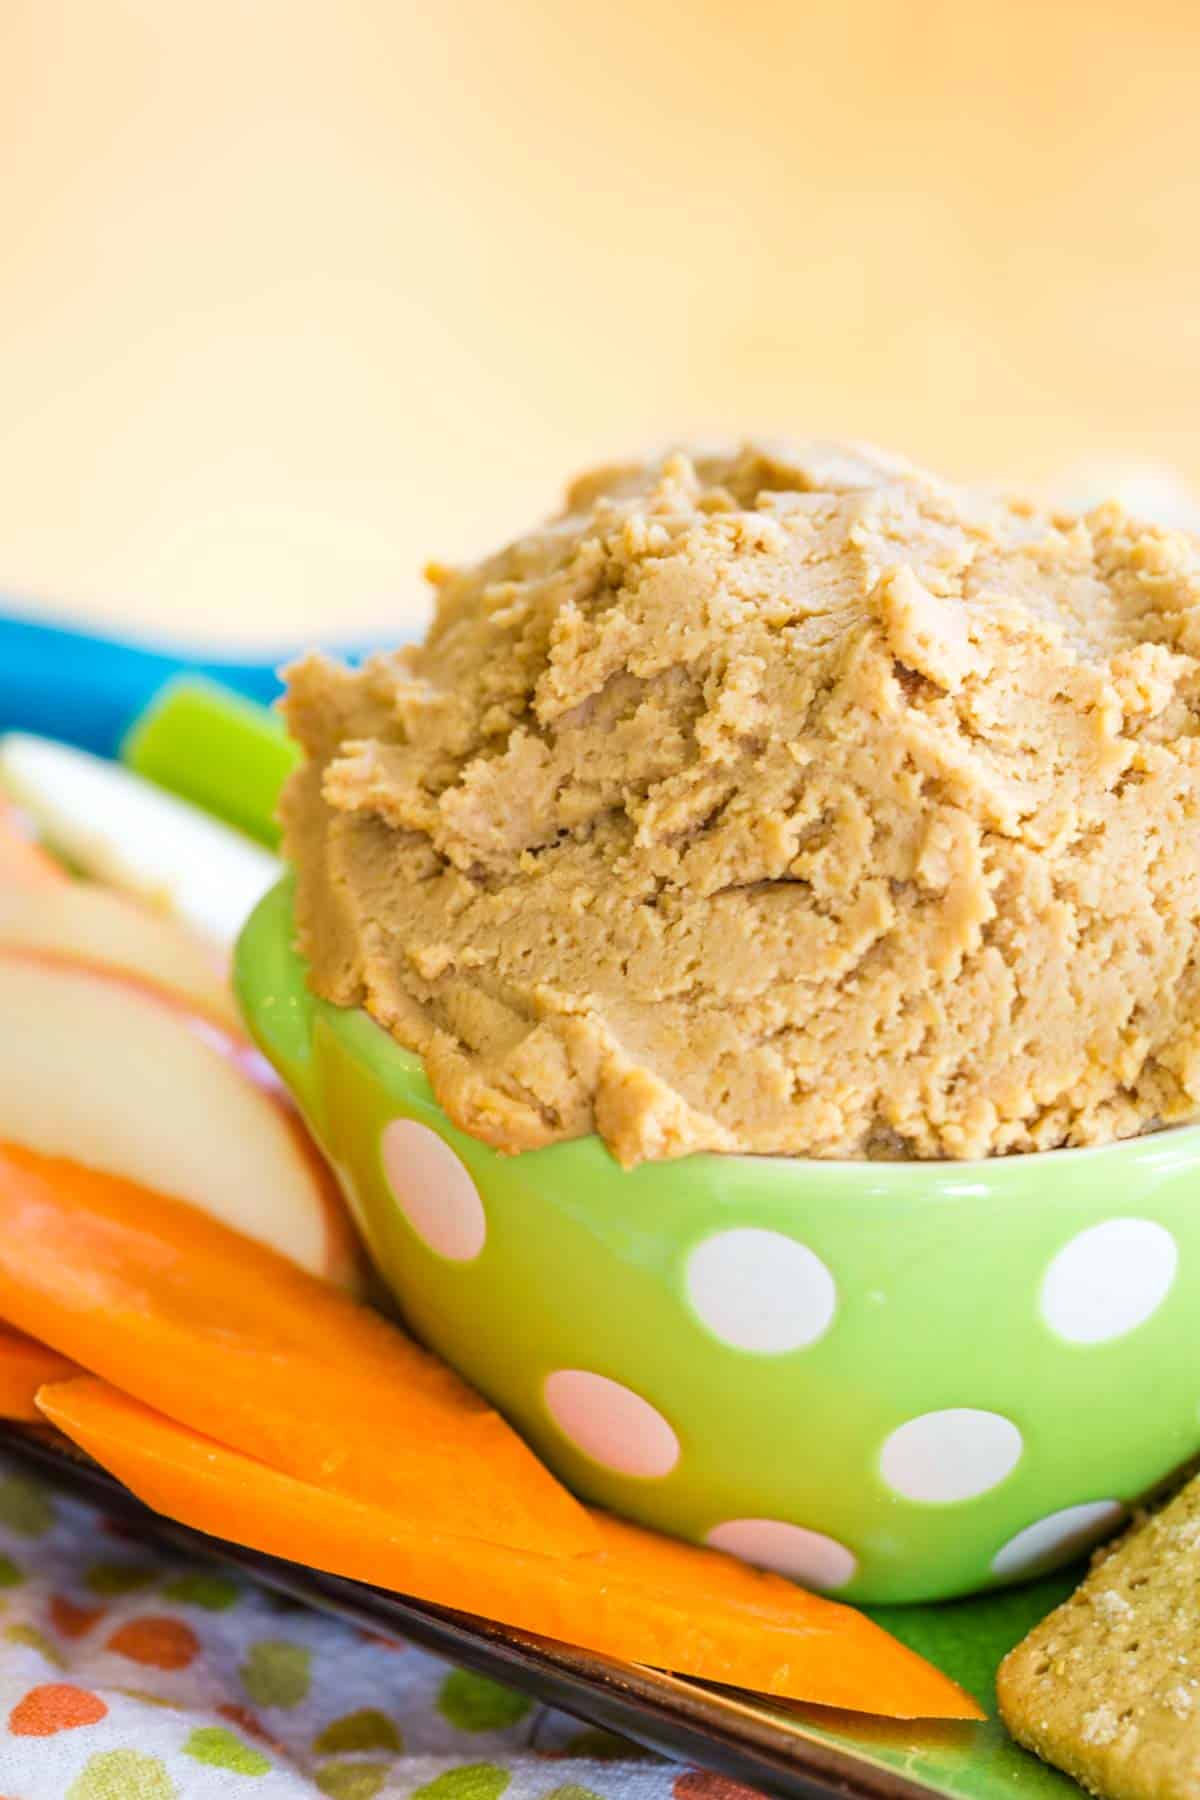 Peanut Butter Dessert Hummus in a green polka dot bowl with carrots and apples around it.